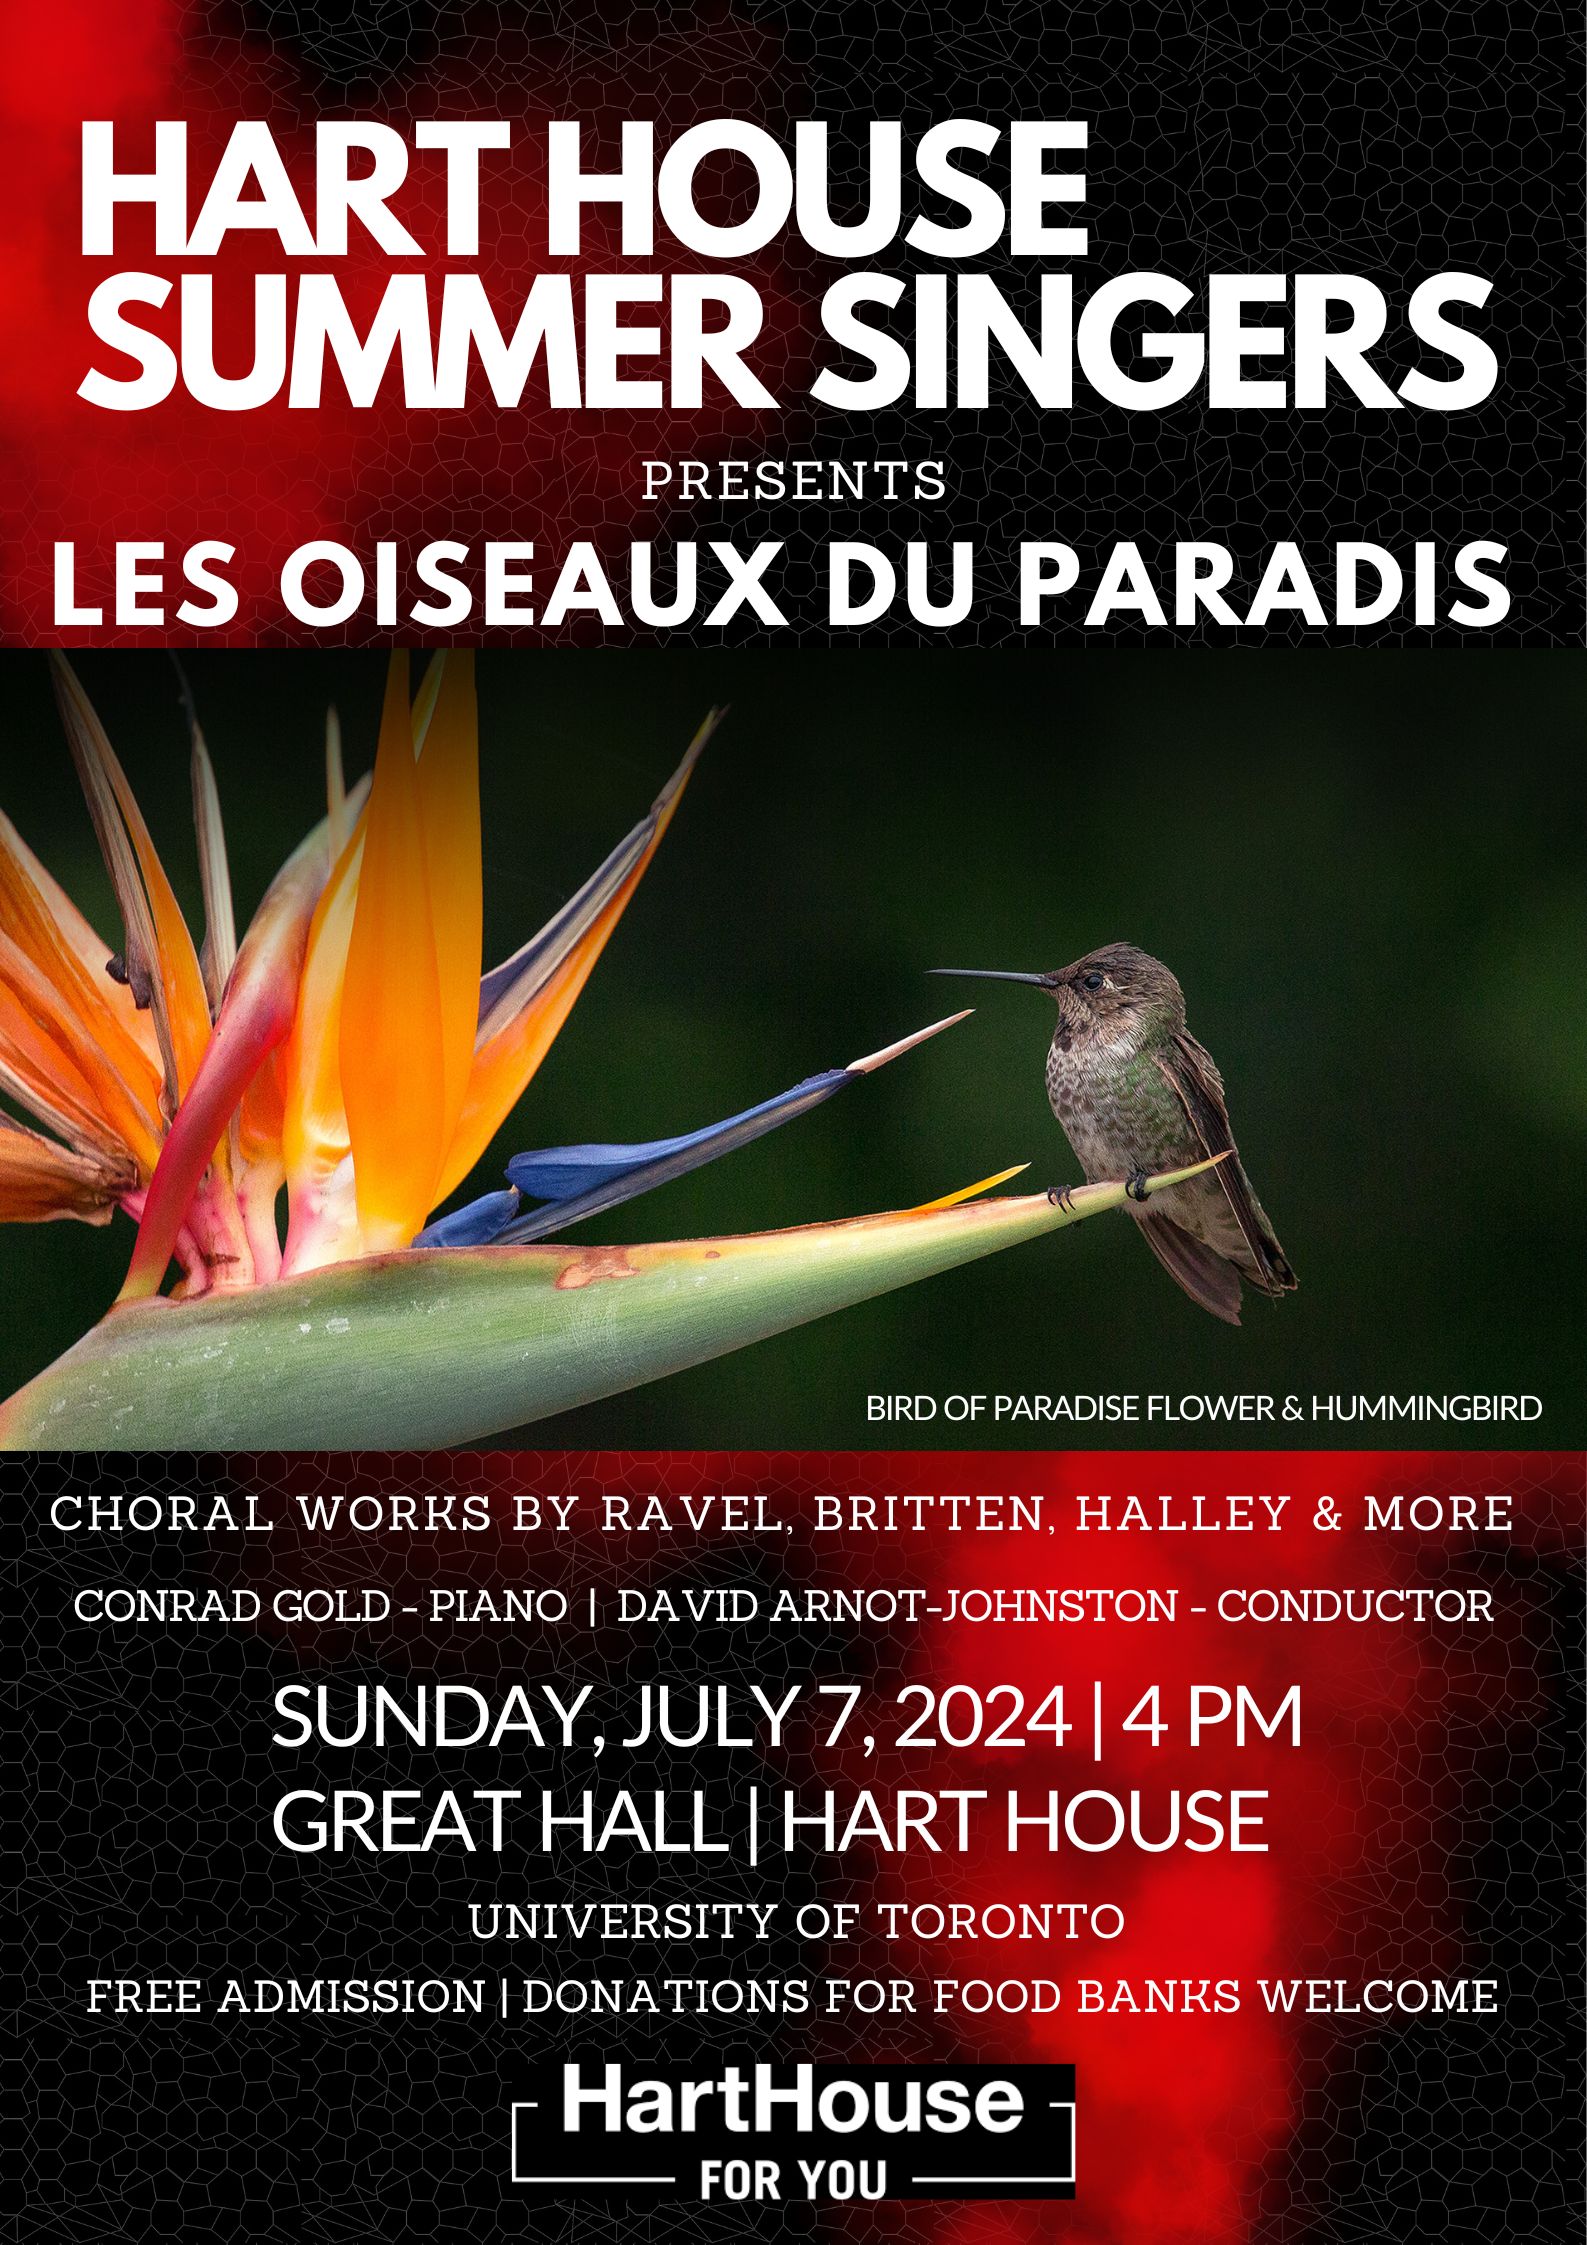 Join the Hart House Singers Sunday, July 7th at 4PM for Les Oiseaux des Paradis, Choral Works by Ravel Britten, Halley and more at Hart House.